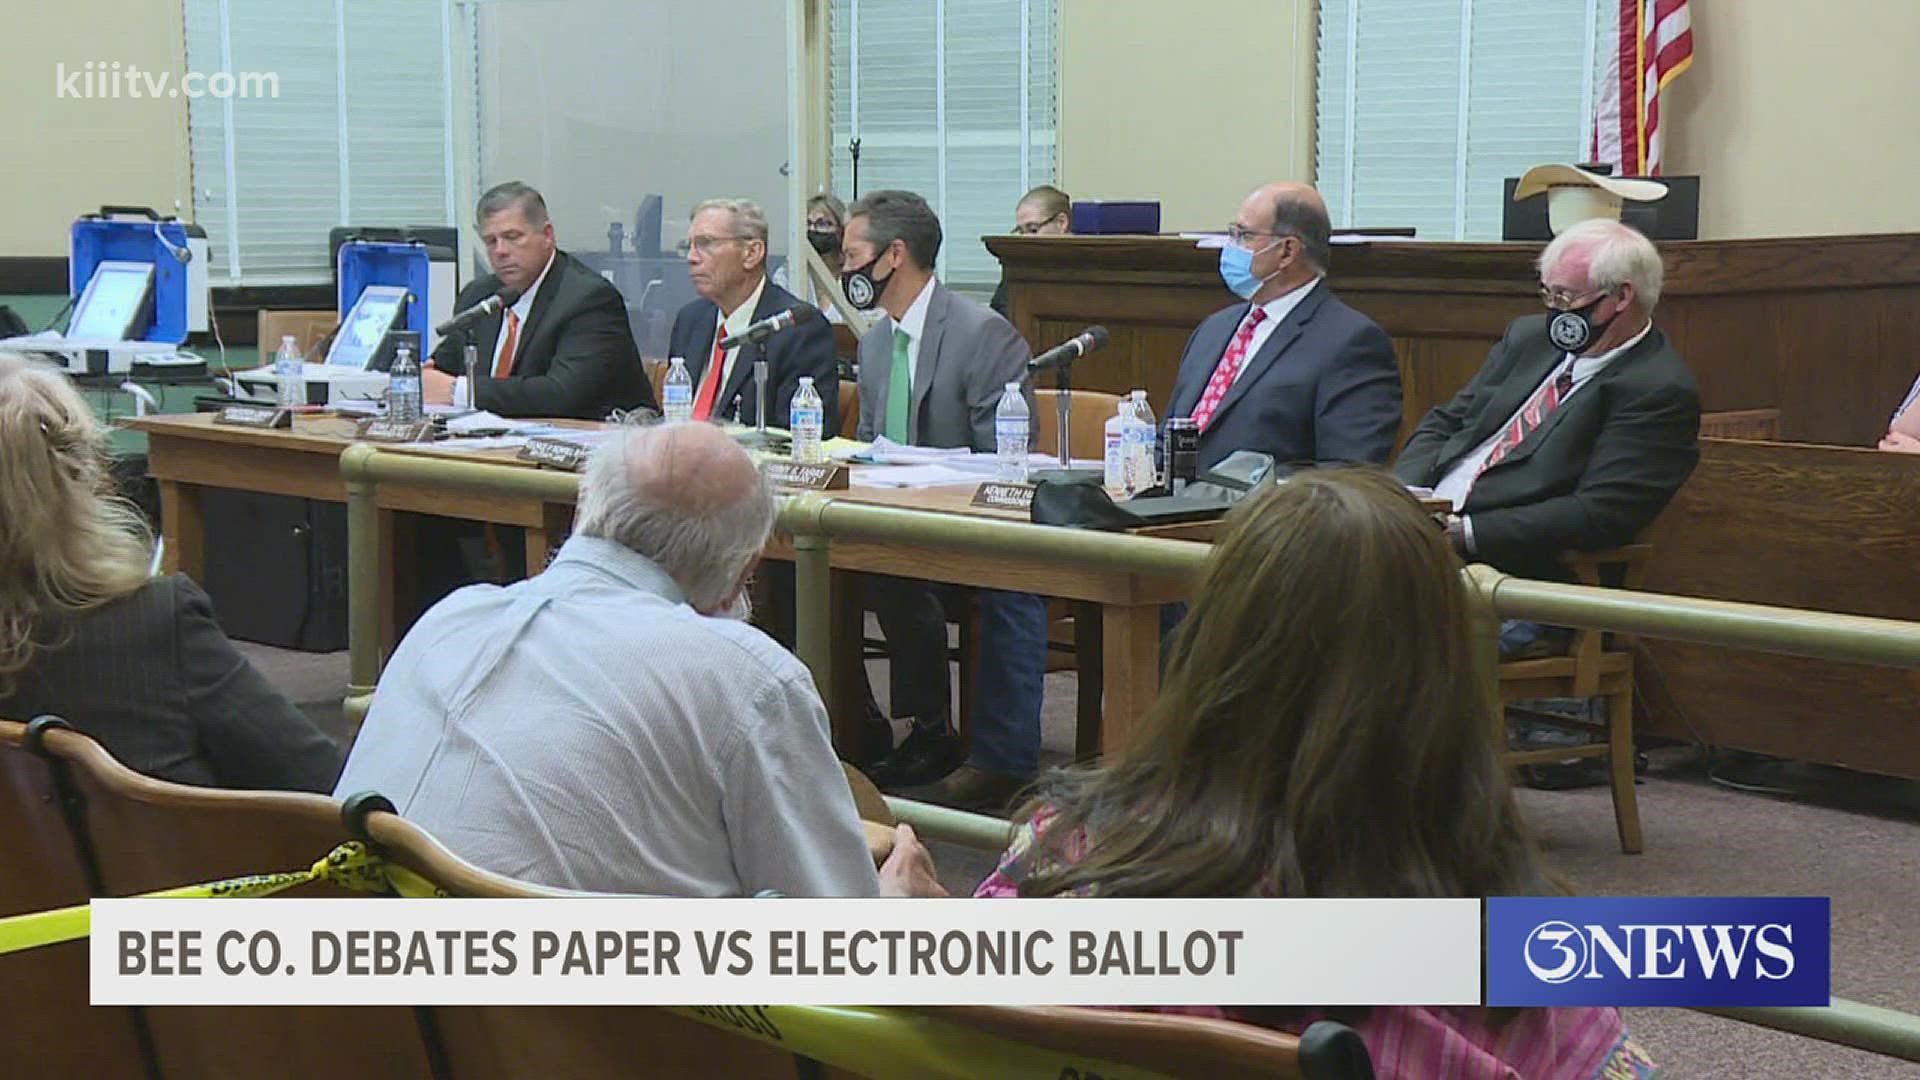 There were plenty of folks who heard from the Bee County Elections Administrator who defended the use of electronic voting machines.